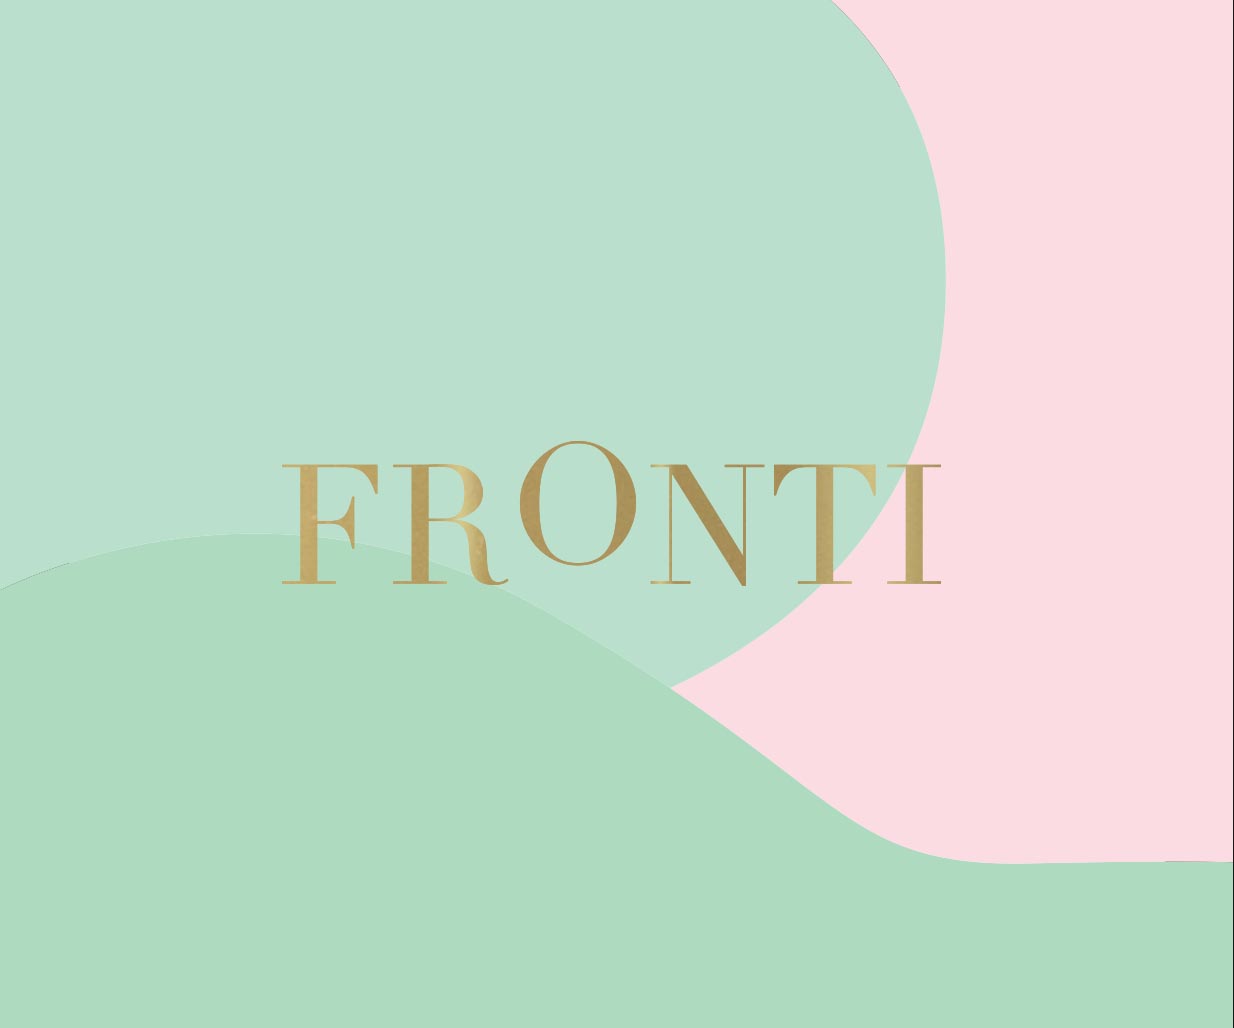 Branding Agency Percept Continue Their Partnership With Edenvale With Wine Packaging Design for their New Product Fronti